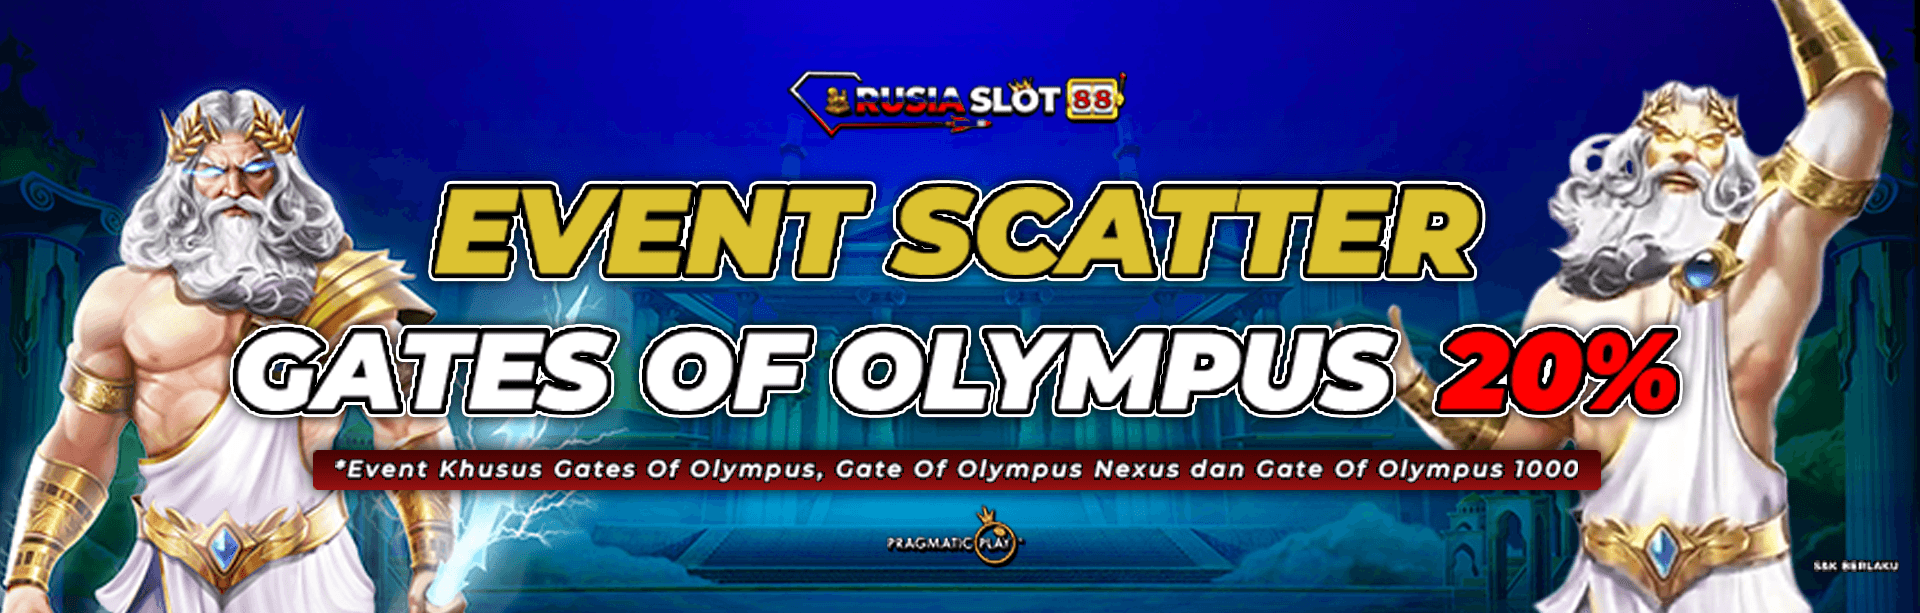 EVENT SCATTER GATES OF OLYMPUS